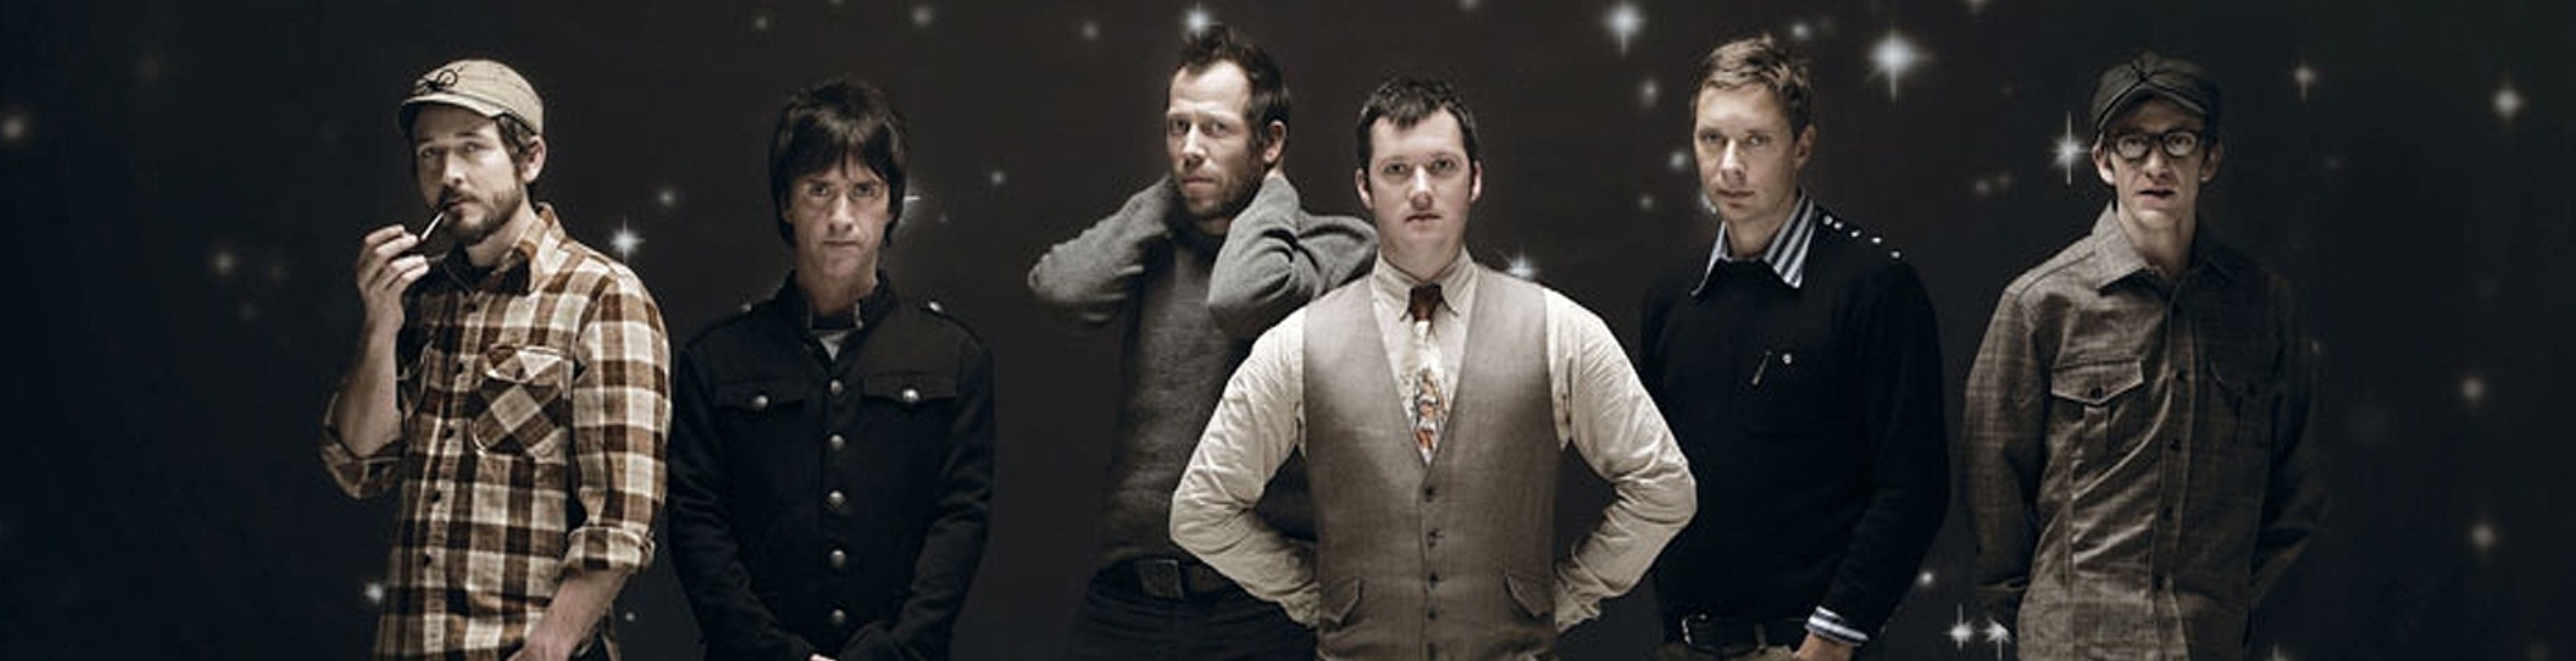 Modest-Mouse-Band-Wallpaper